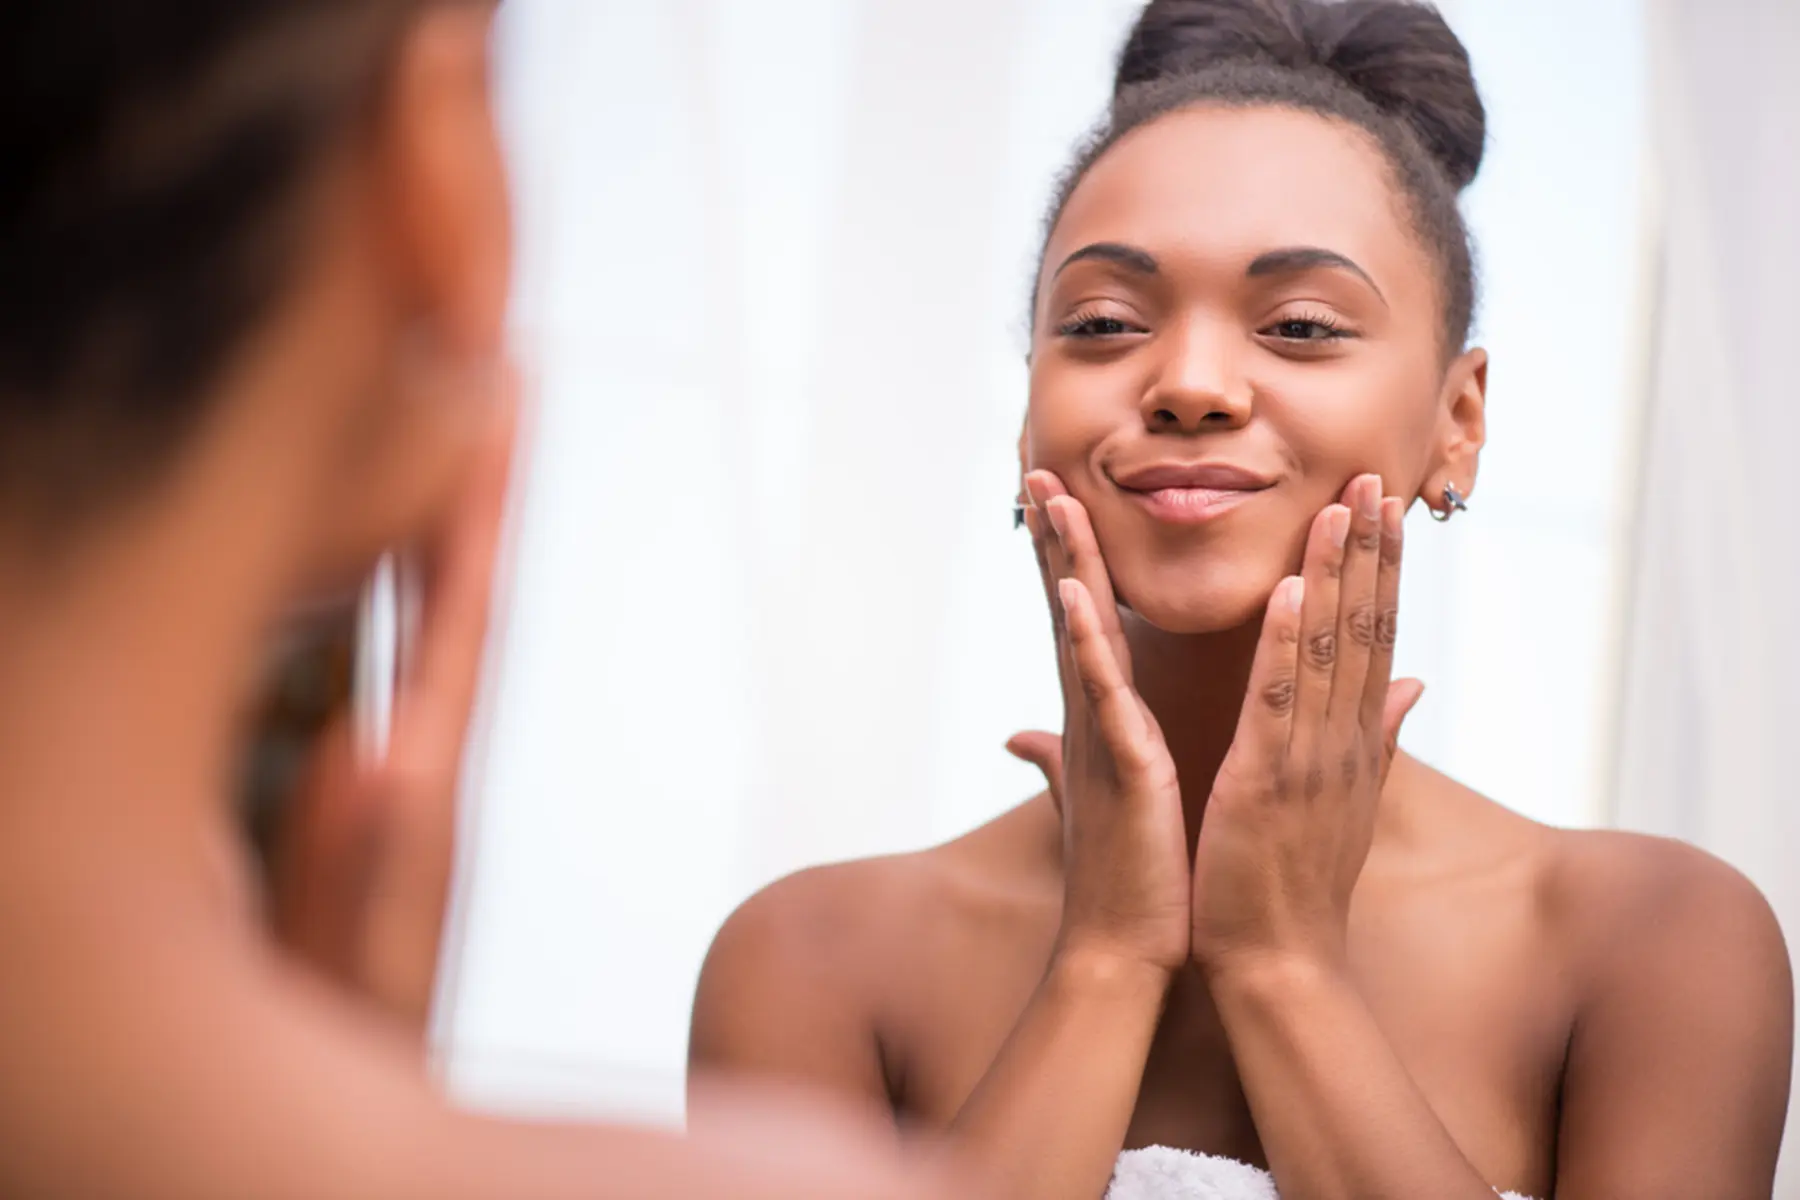 A woman looks in a mirror and applies skin care products.